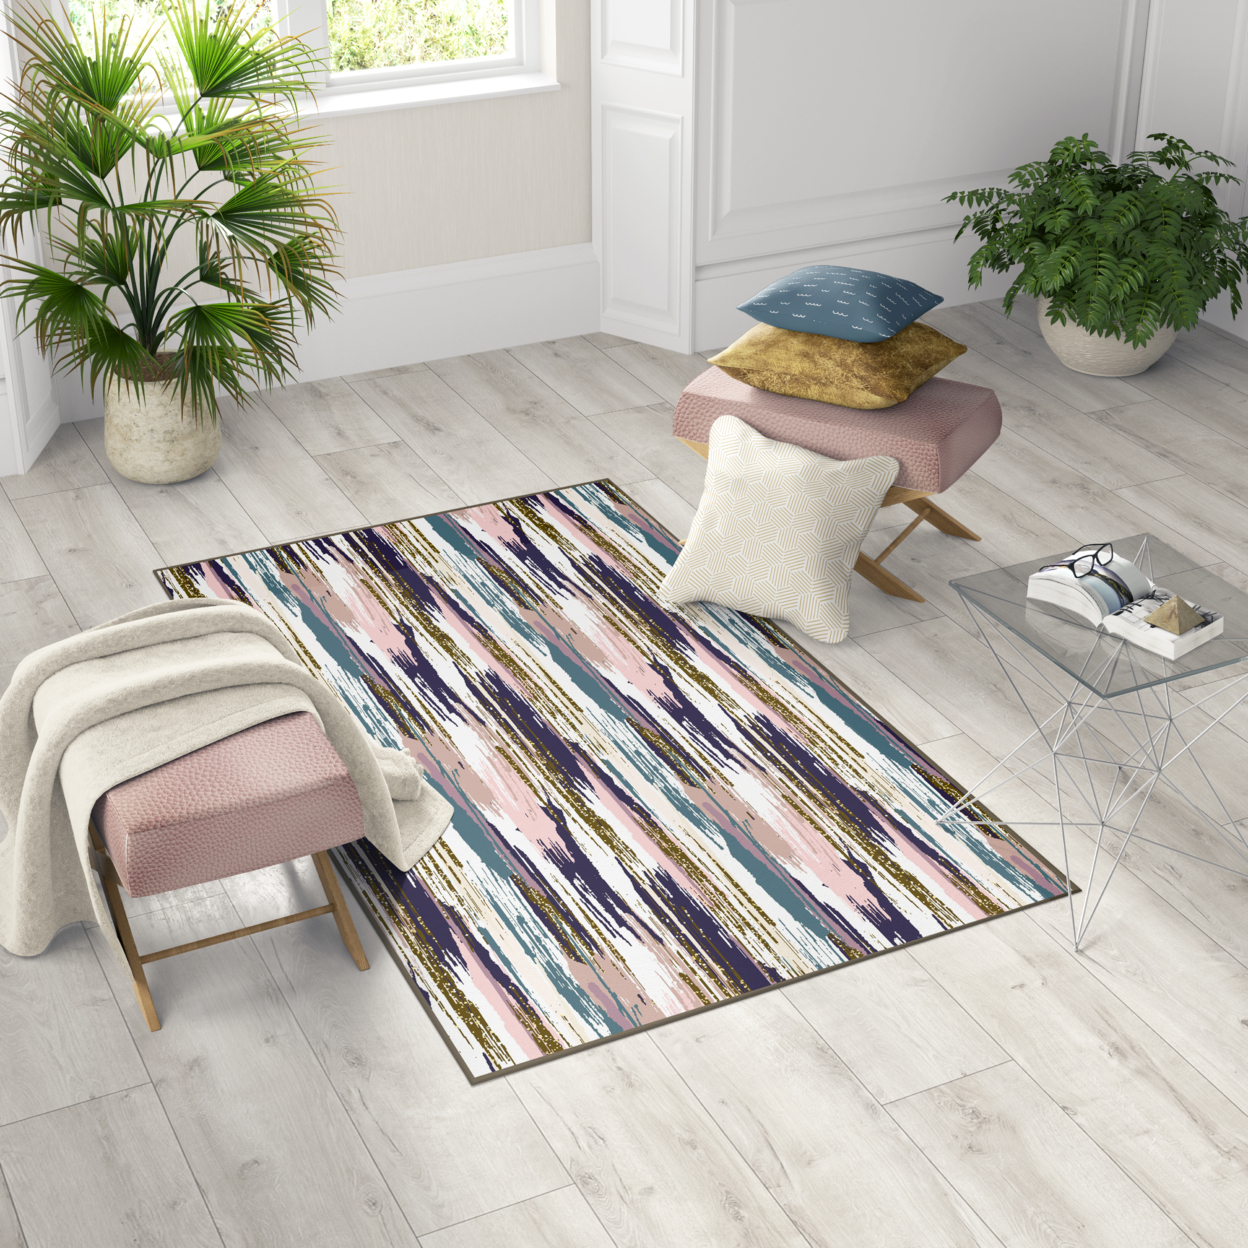 Deerlux Modern Living Room Area Rug With Nonslip Backing, Abstract Brushstrokes And Glitter Pattern - 4 X 6